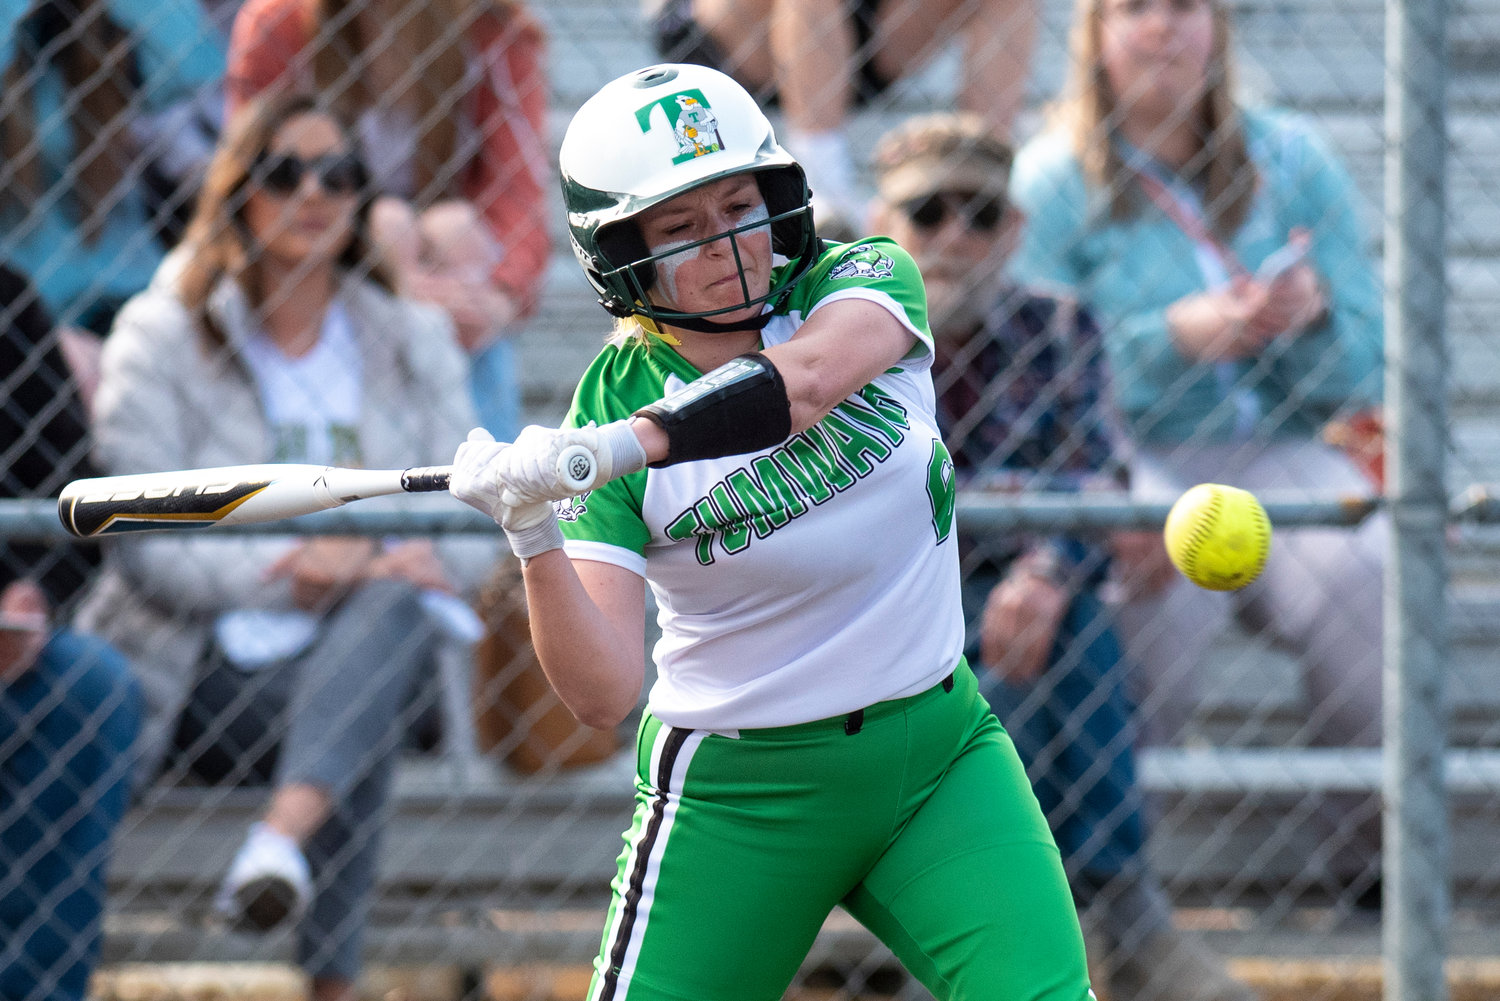 Tumwater's Jaylene Latchaw lines up a Black Hills' pitch during a home game on March 25.